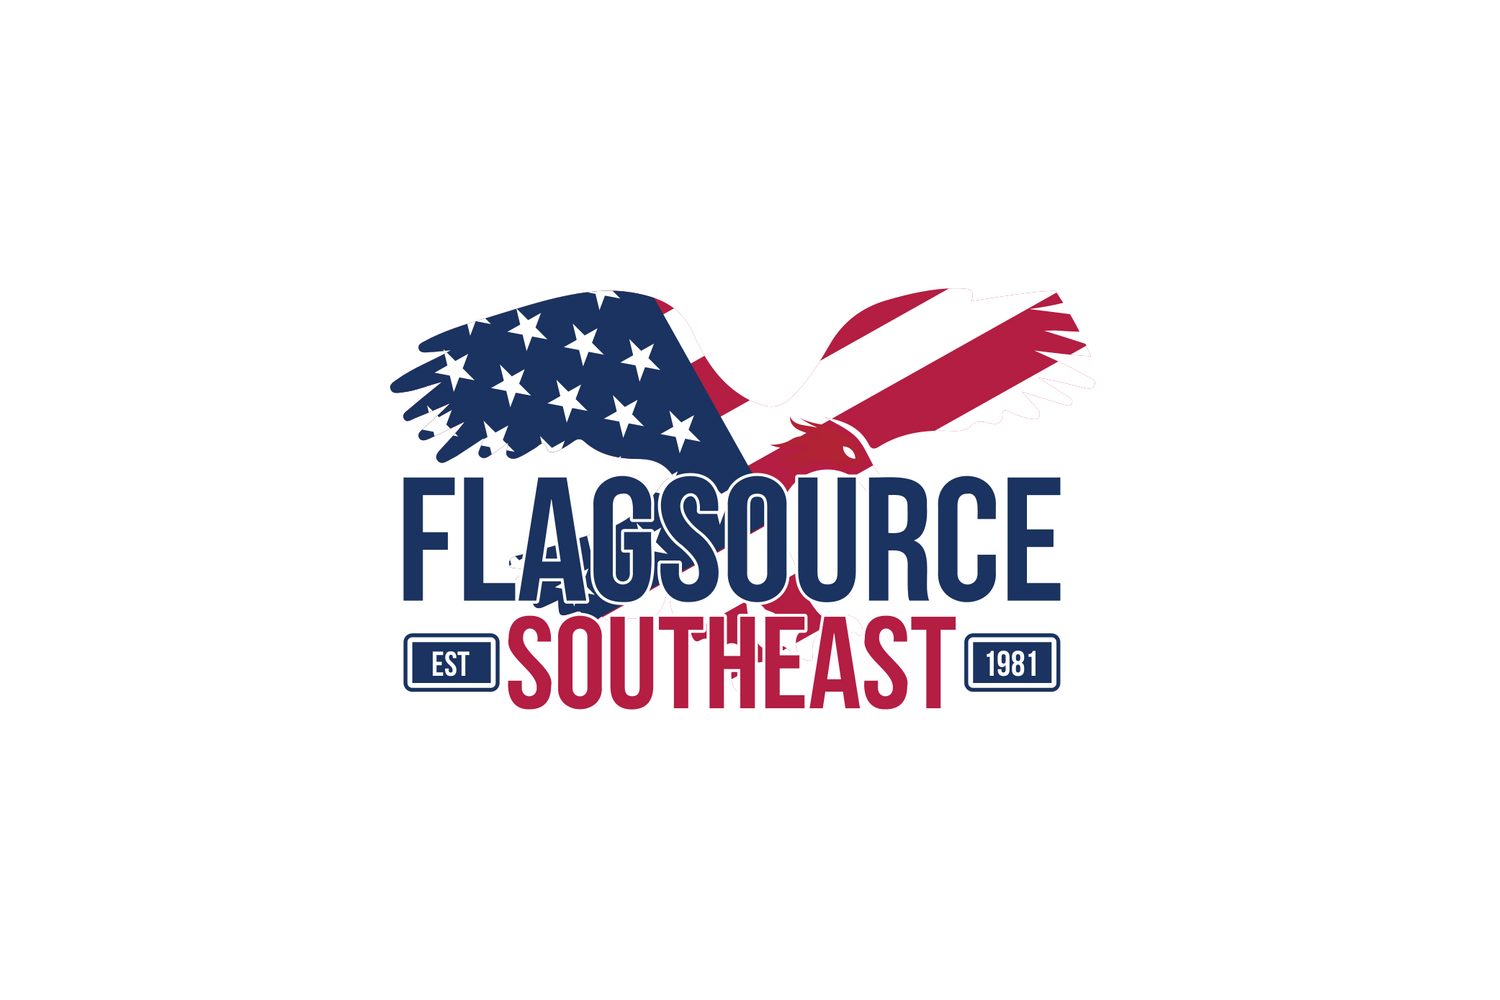 Flagsource Southeast-Established in 1981